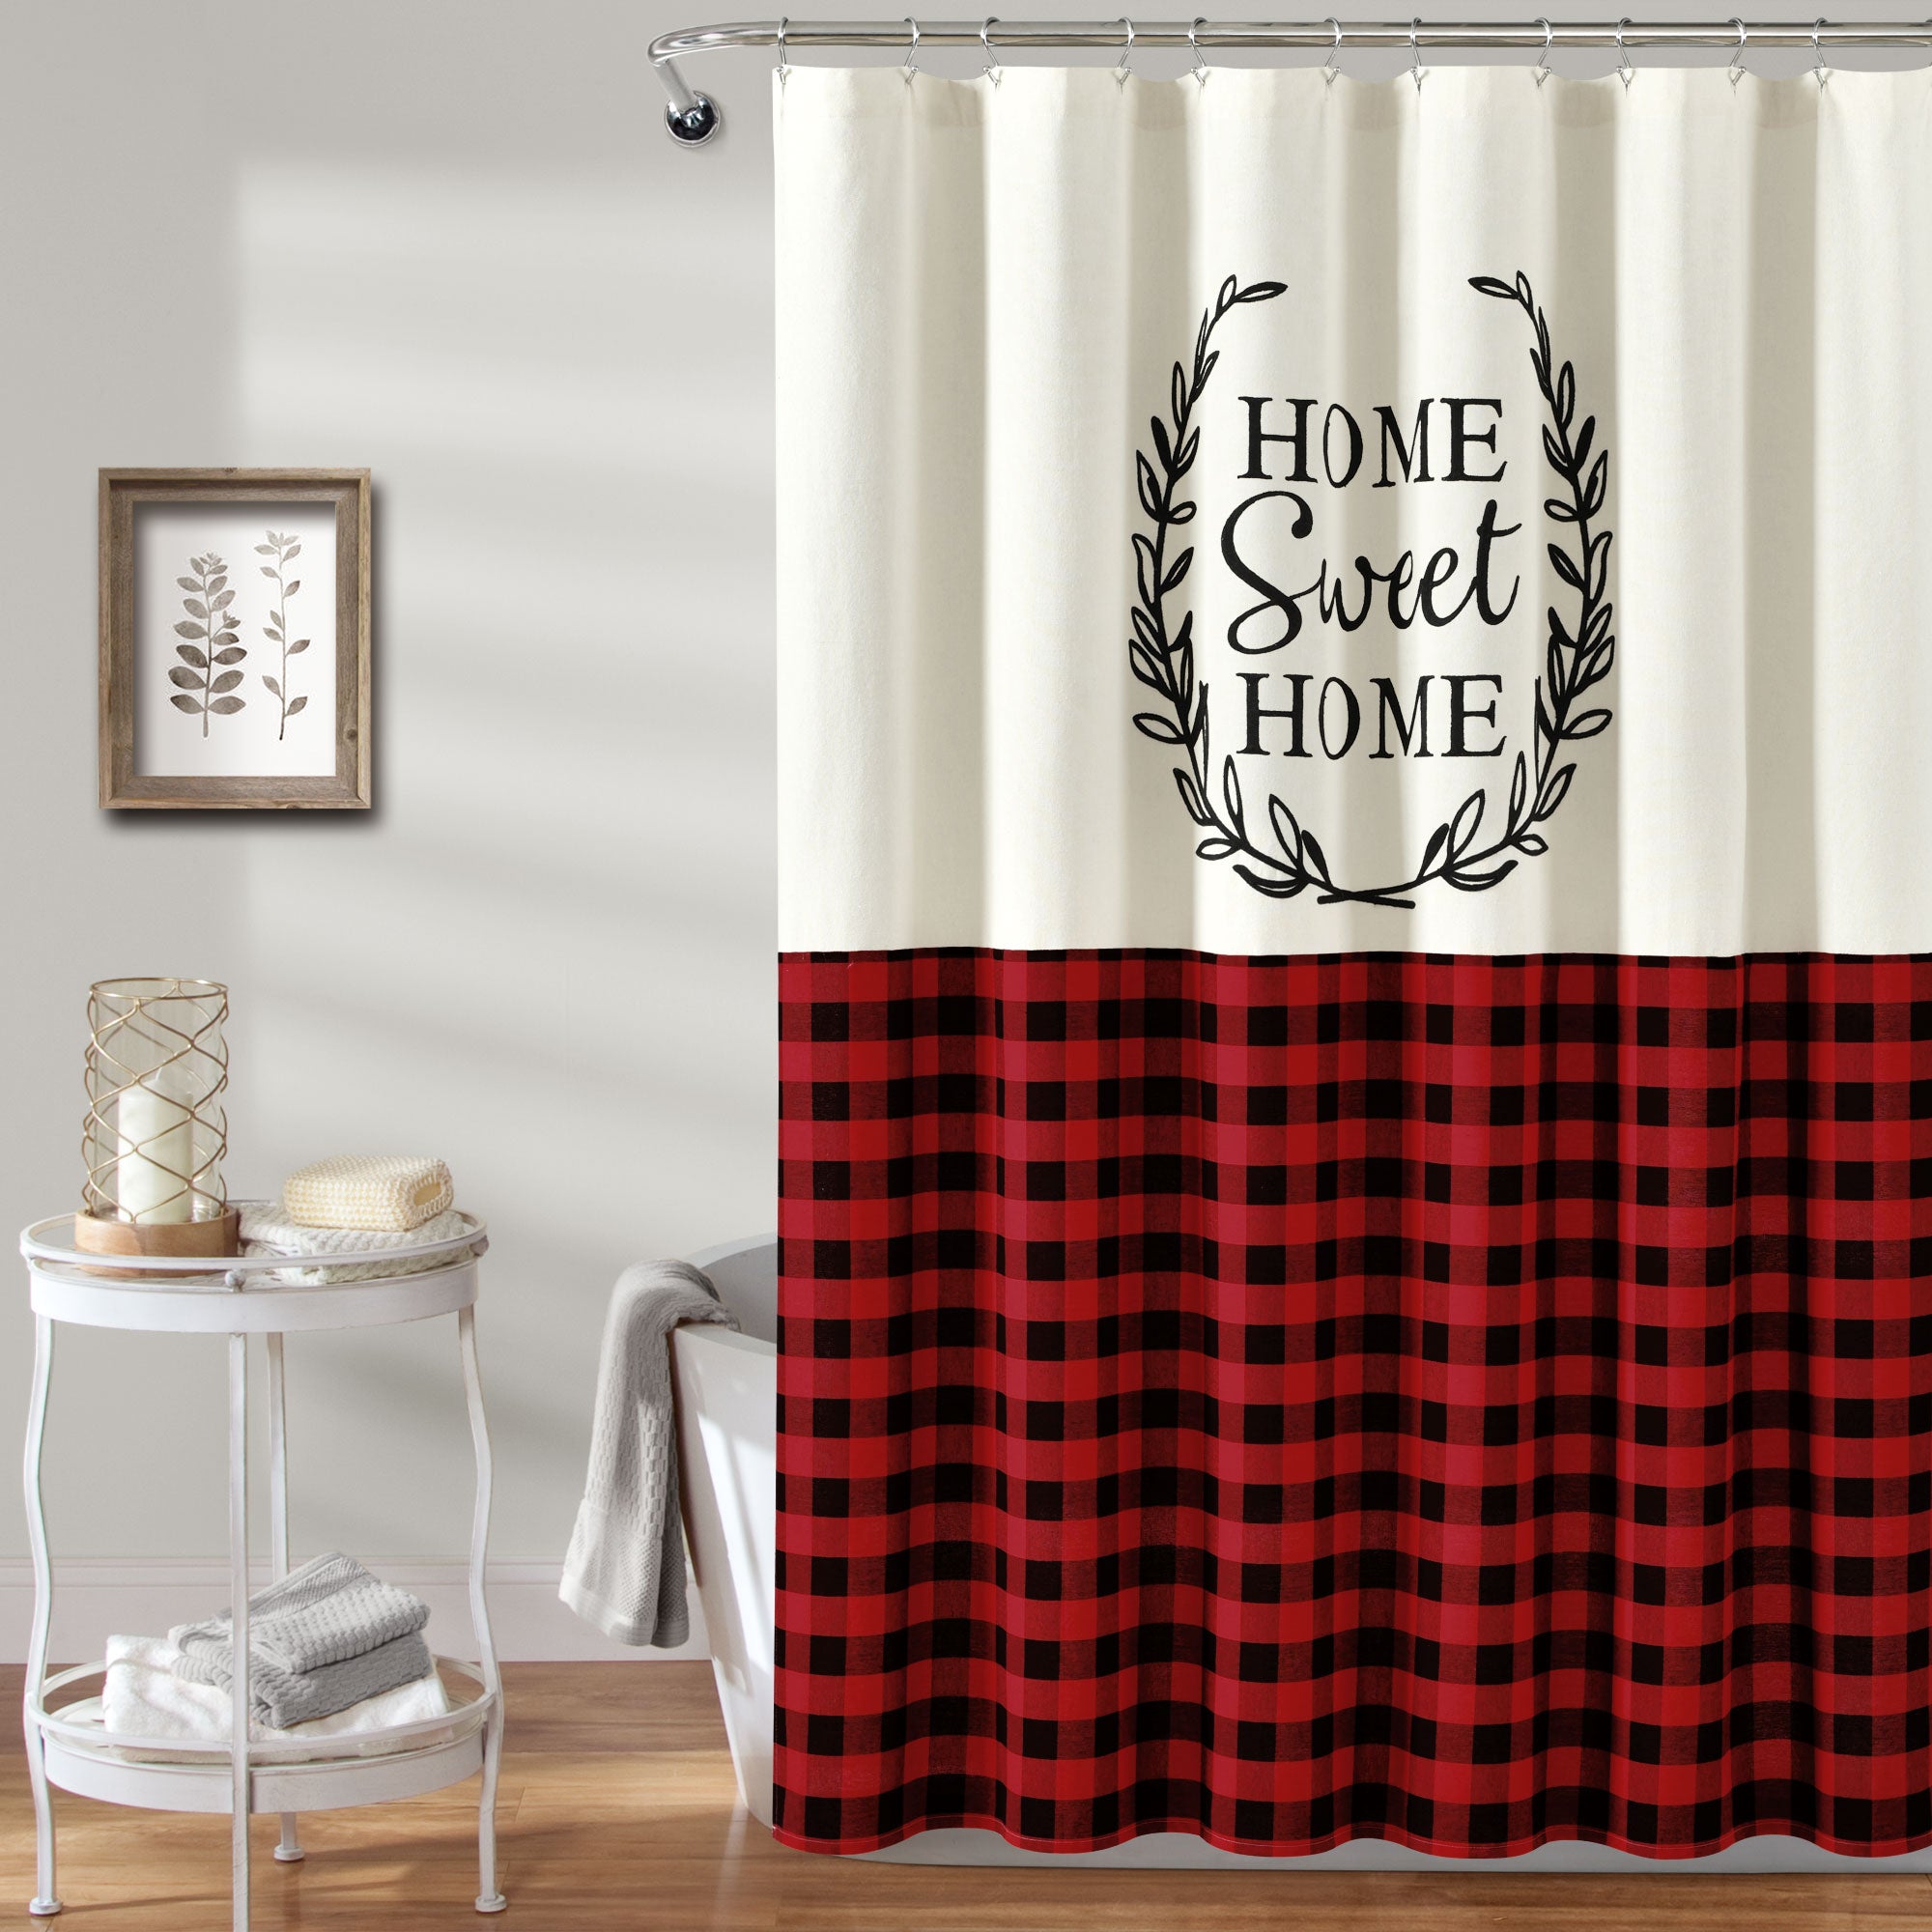 Home Sweet Home Wreath Shower Curtain Red Single